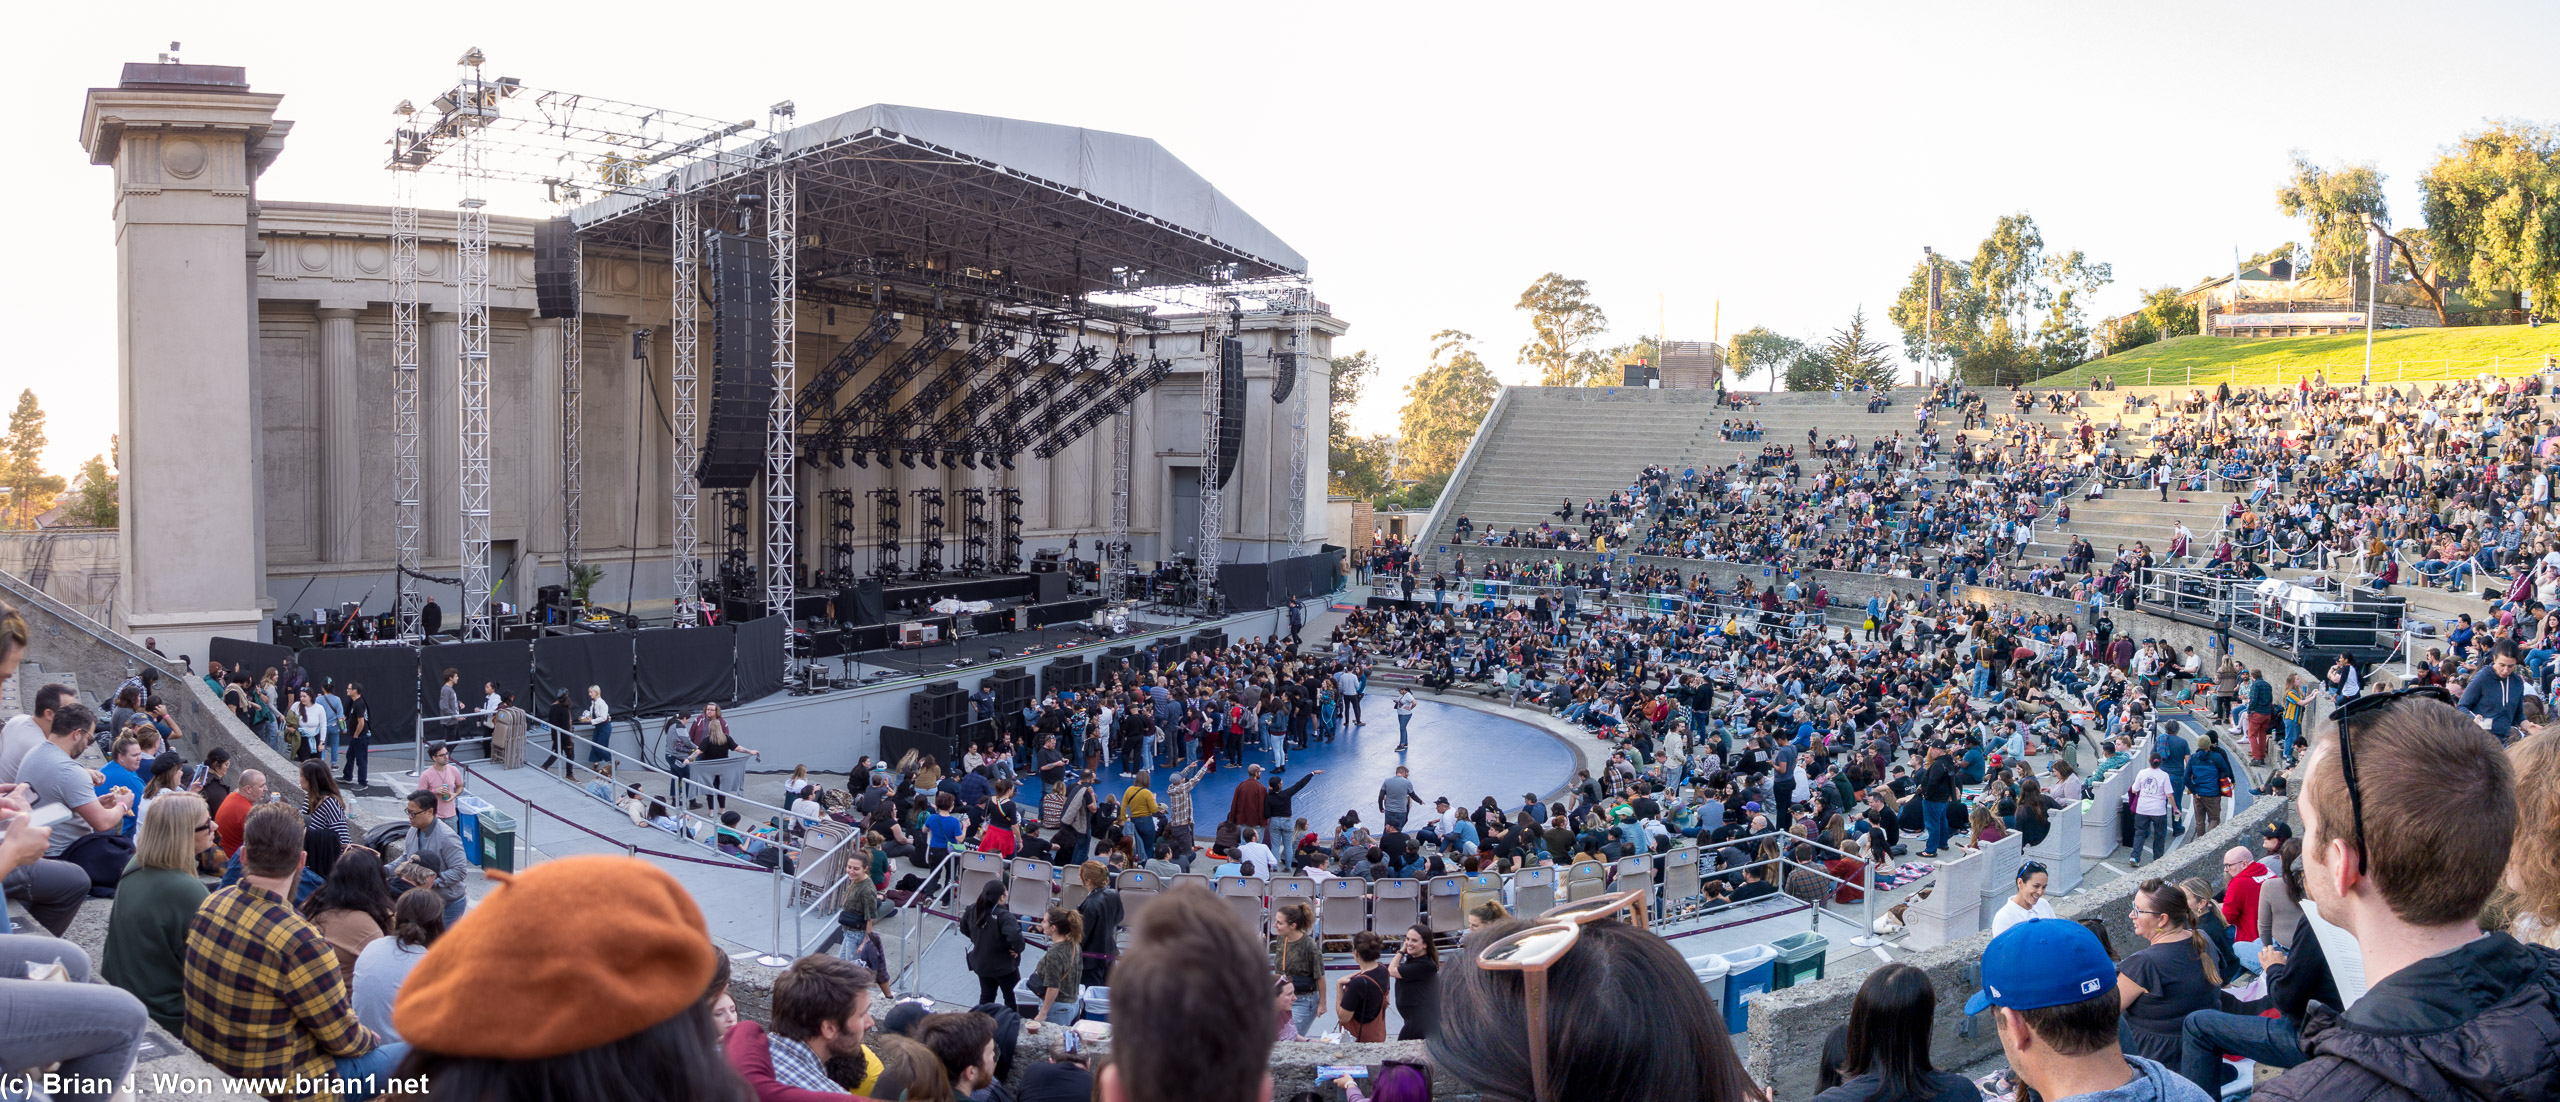 30 minutes before showtime at the Greek Theatre at UC Berkeley.